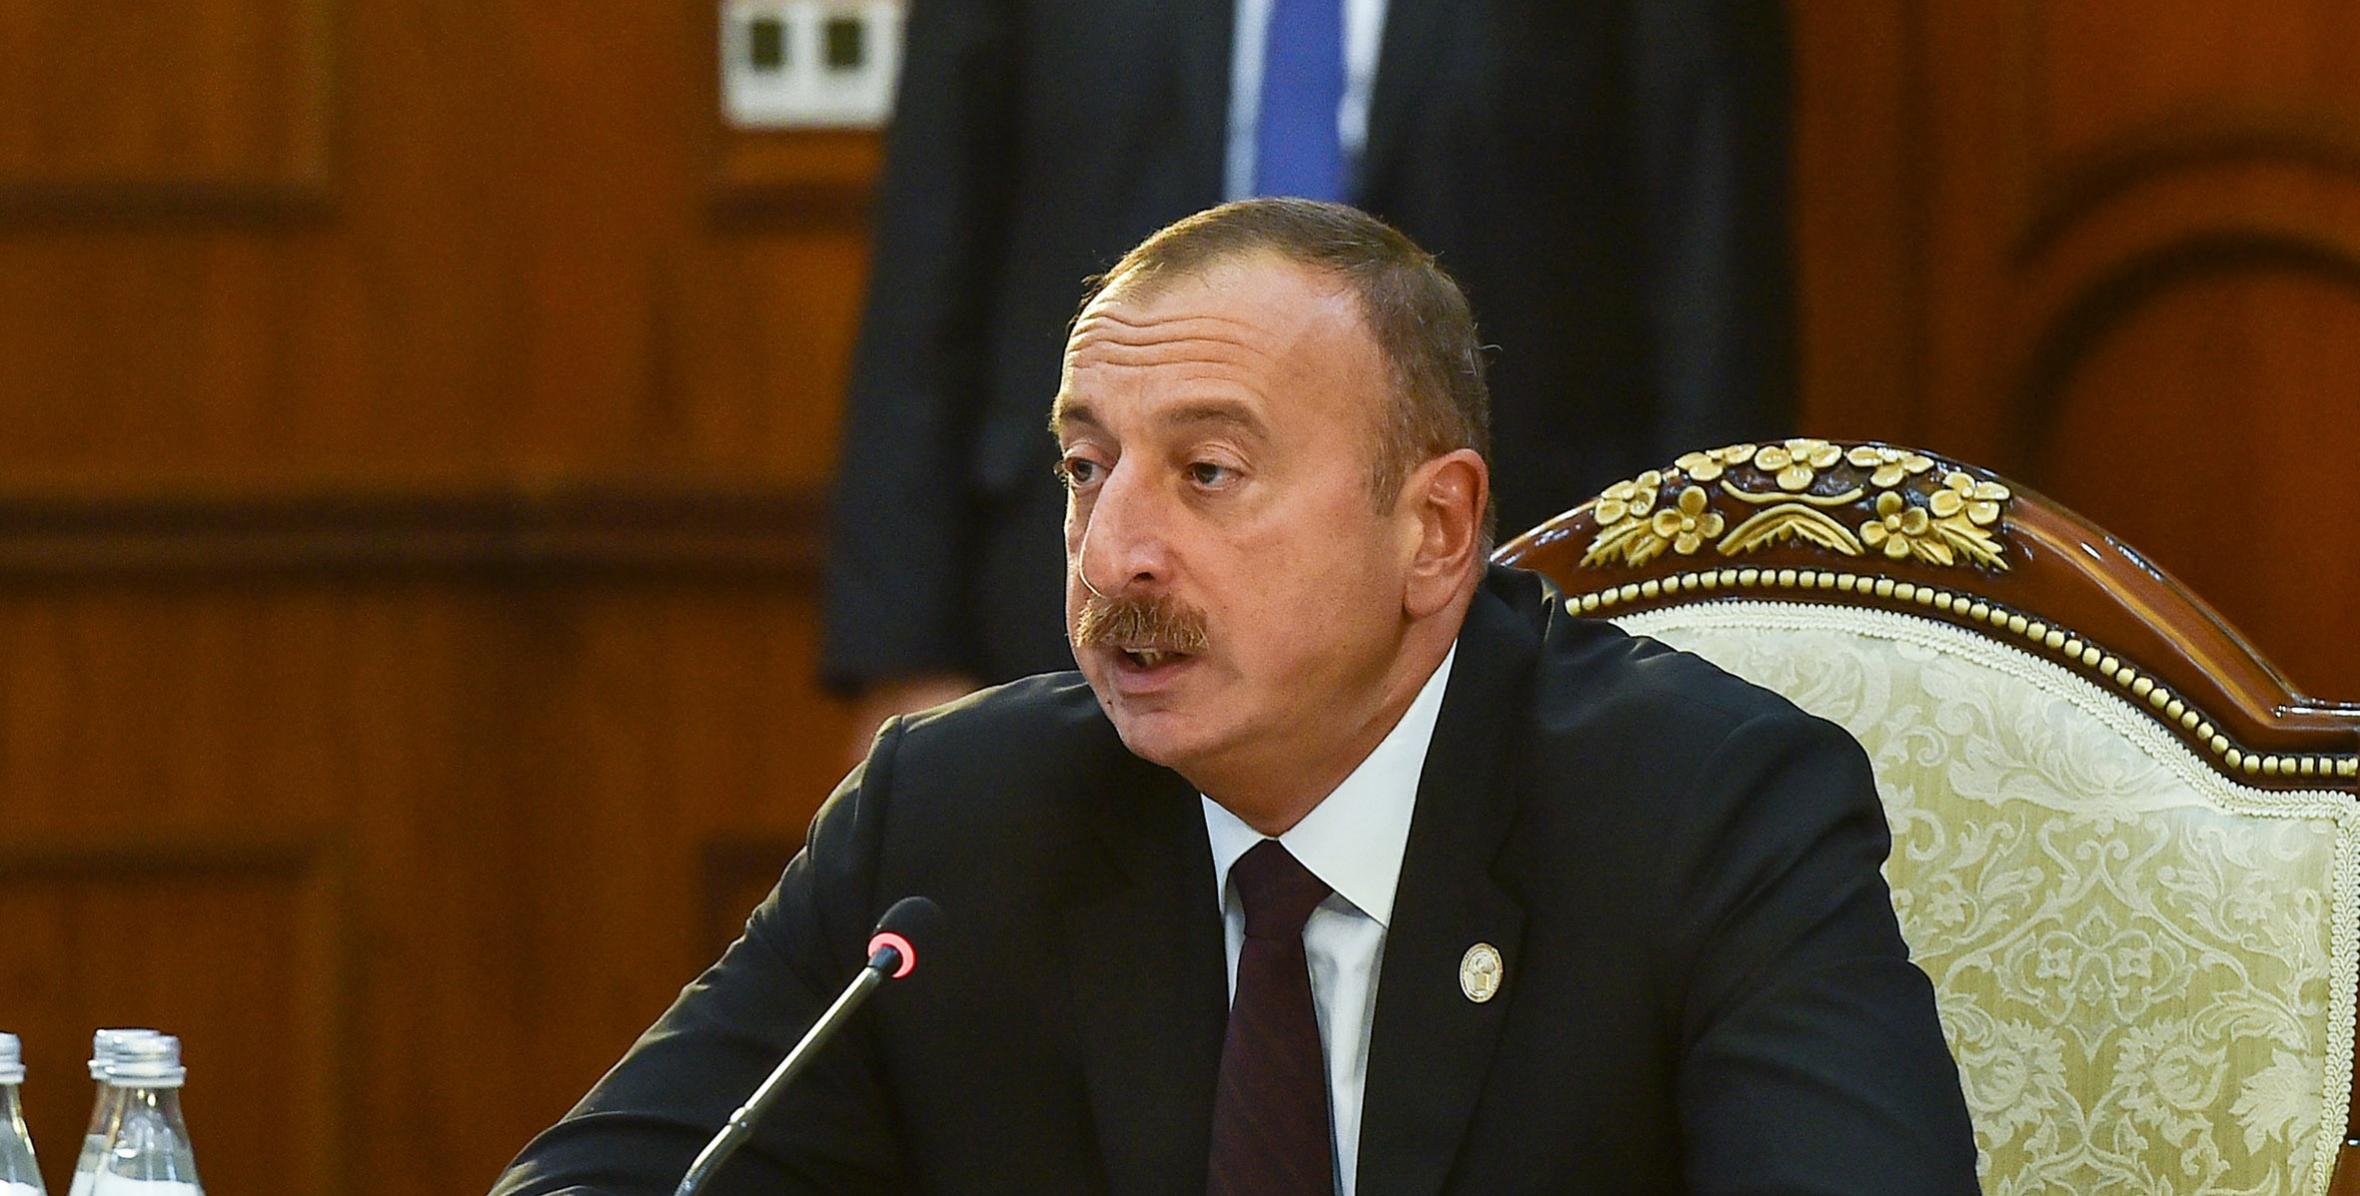 Speech by Ilham Aliyev at the meeting of CIS Council of Heads of State in Bishkek